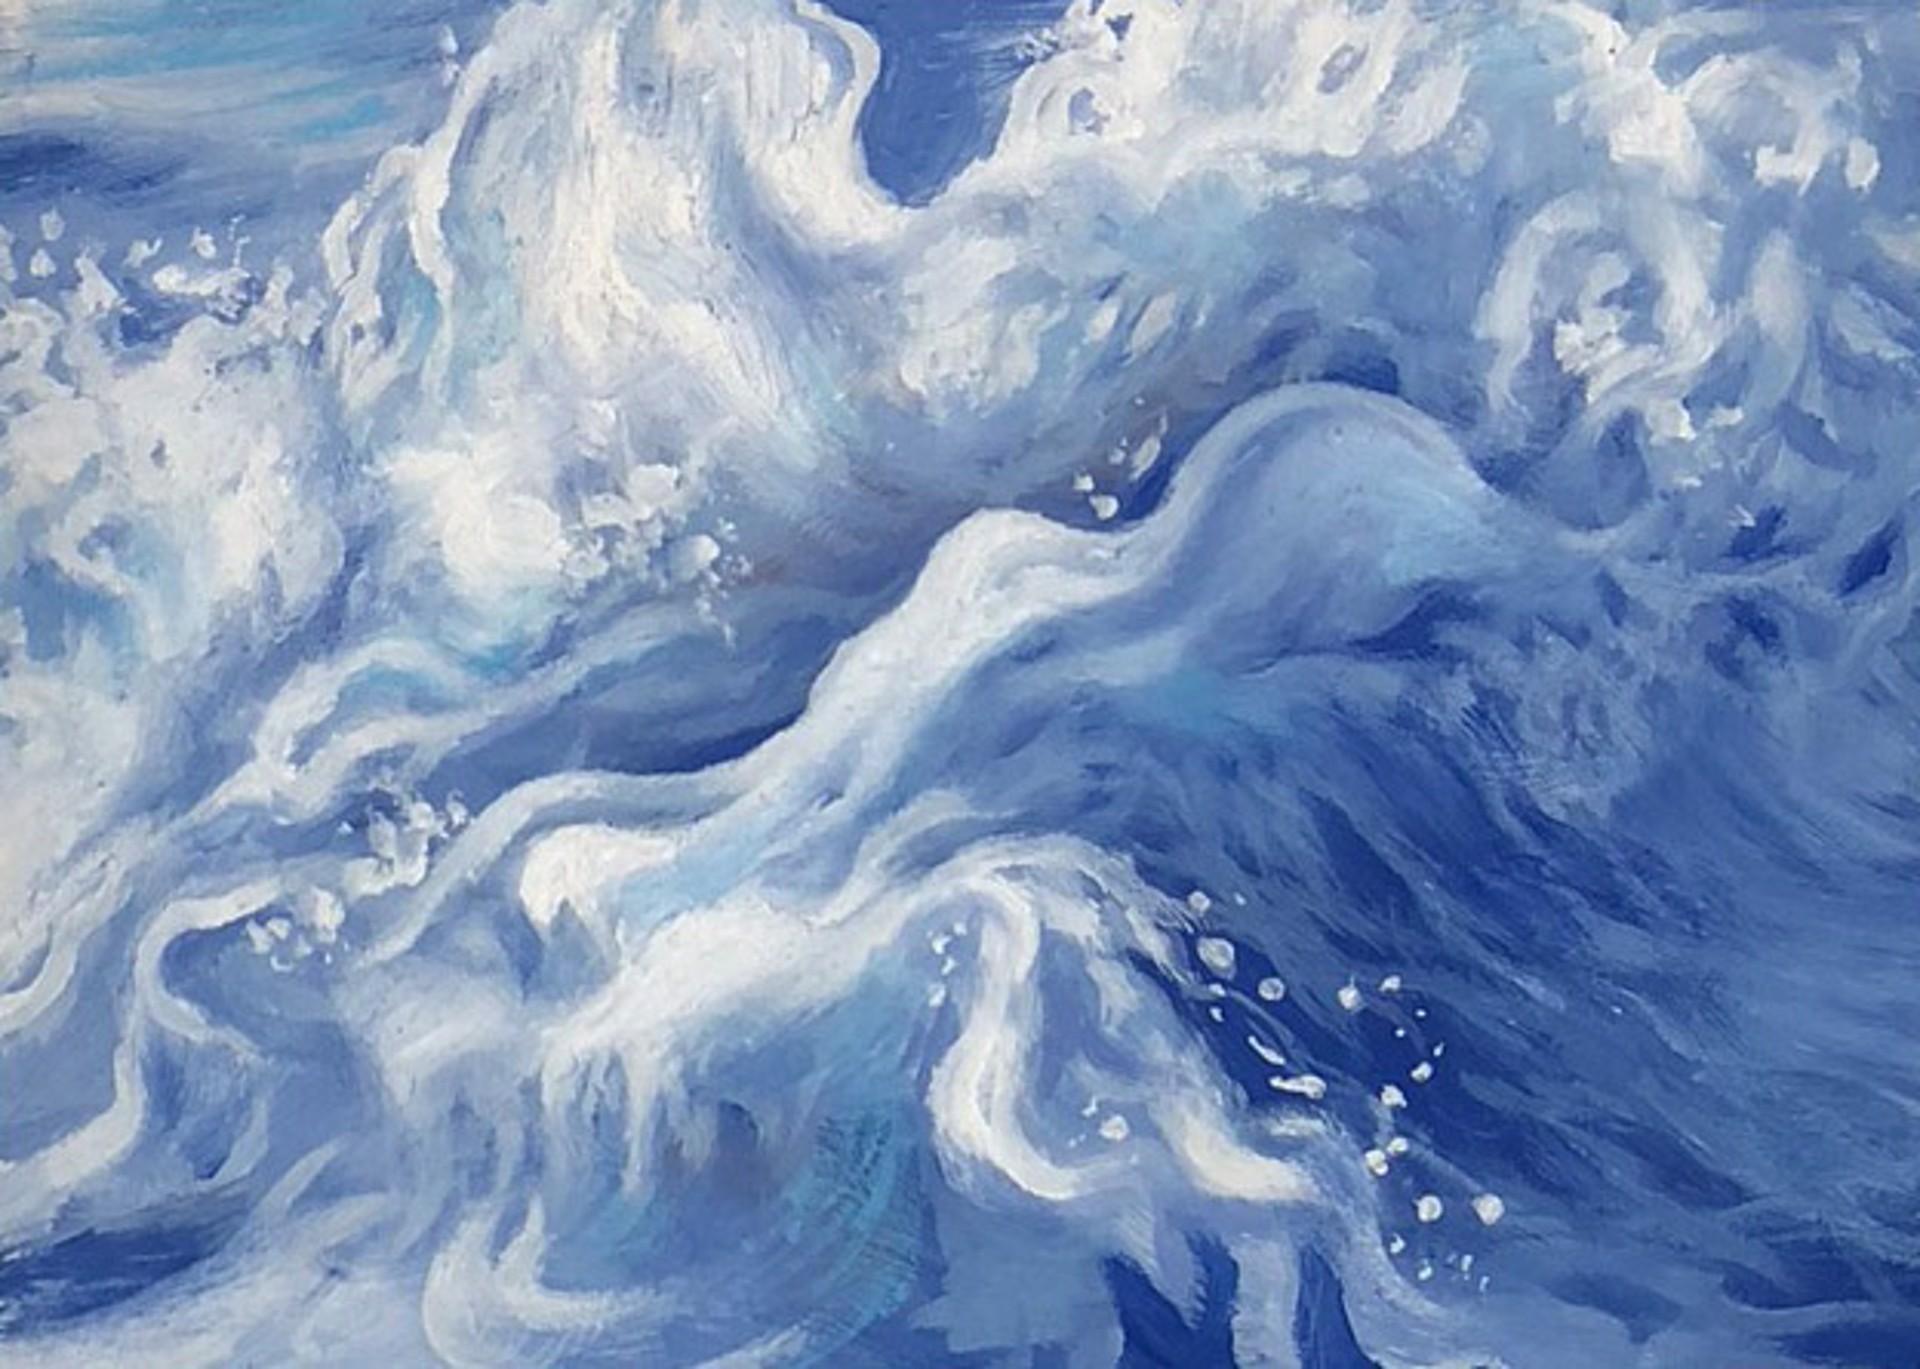 Ocean Froth by Jessica Libor